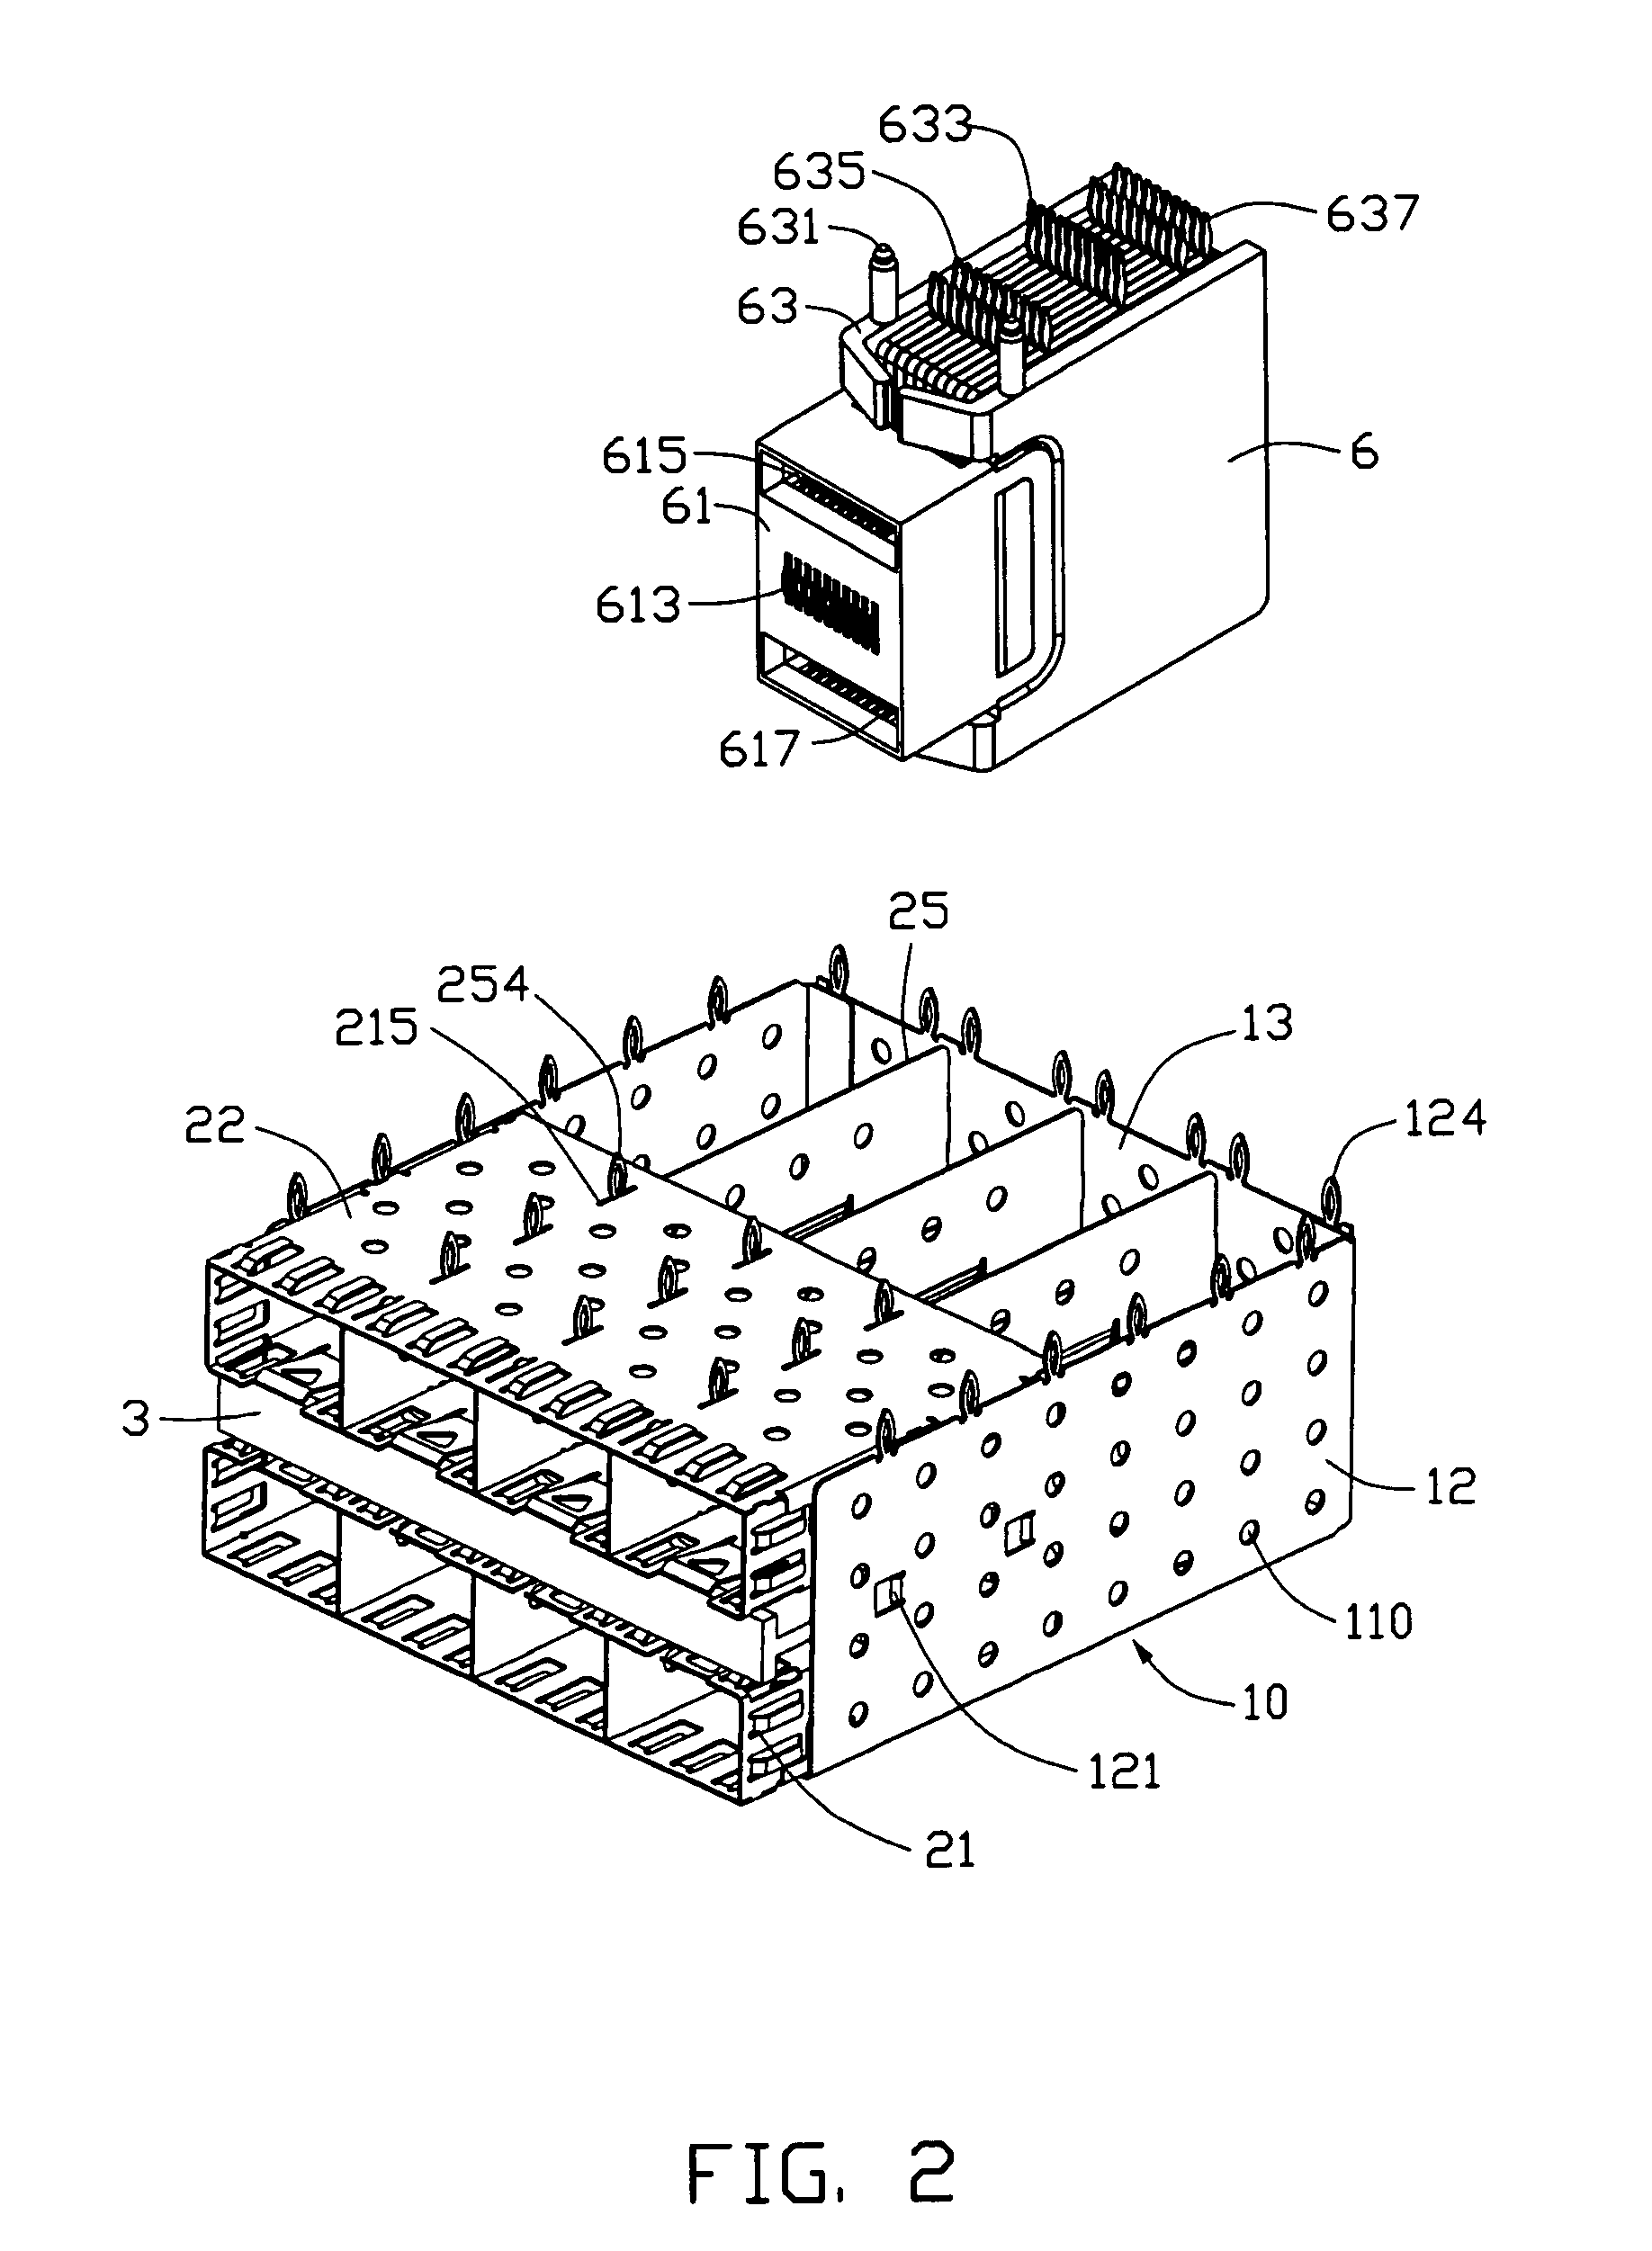 Shielding cage assembly adapted for dense transceiver modules